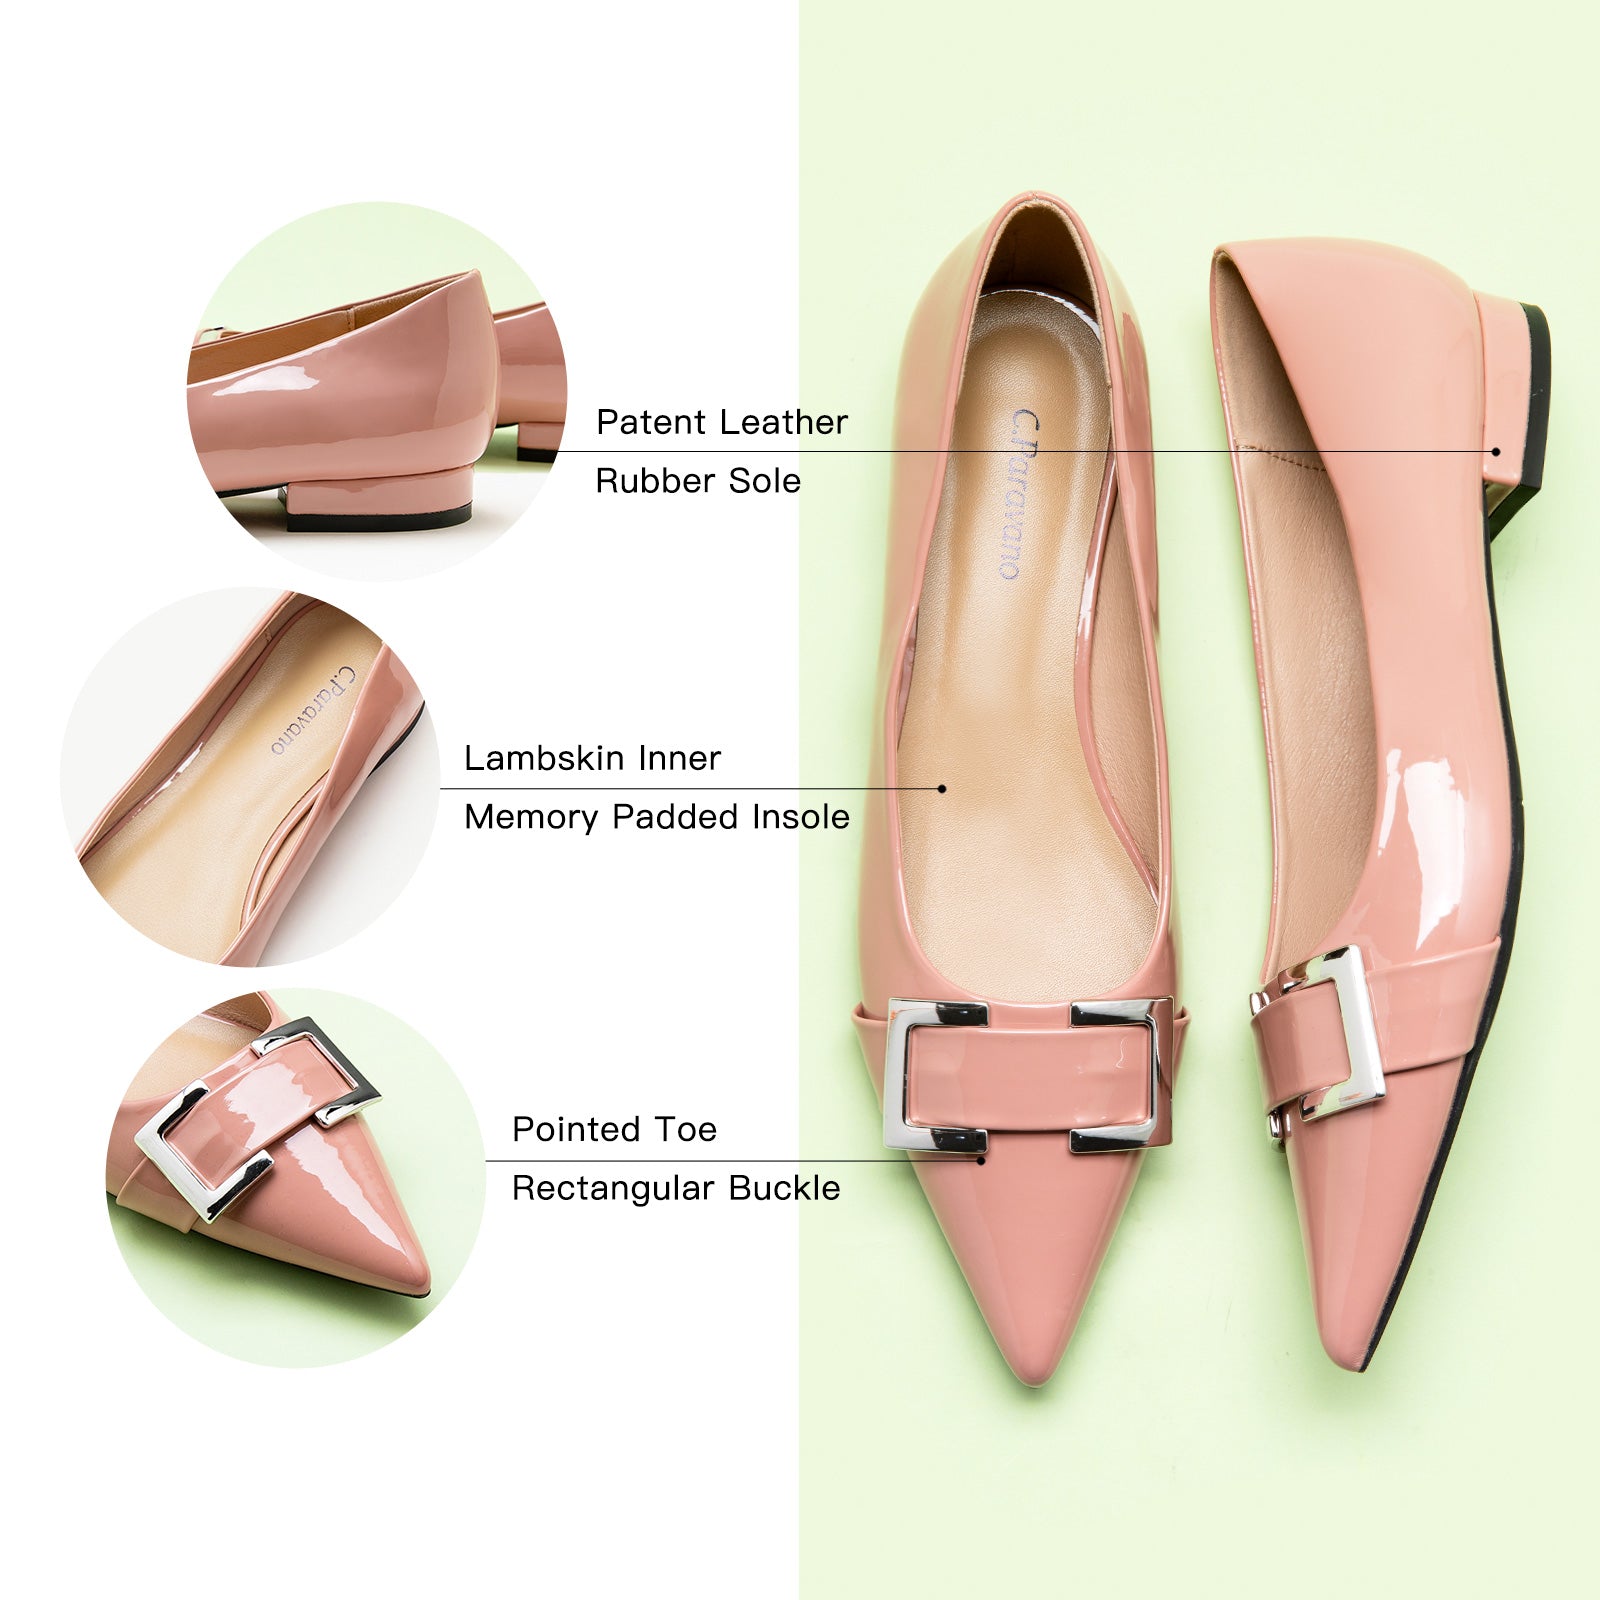 Metal Buckle Flats in Pink with a pointed toe, featuring patent leather for a polished and sophisticated style